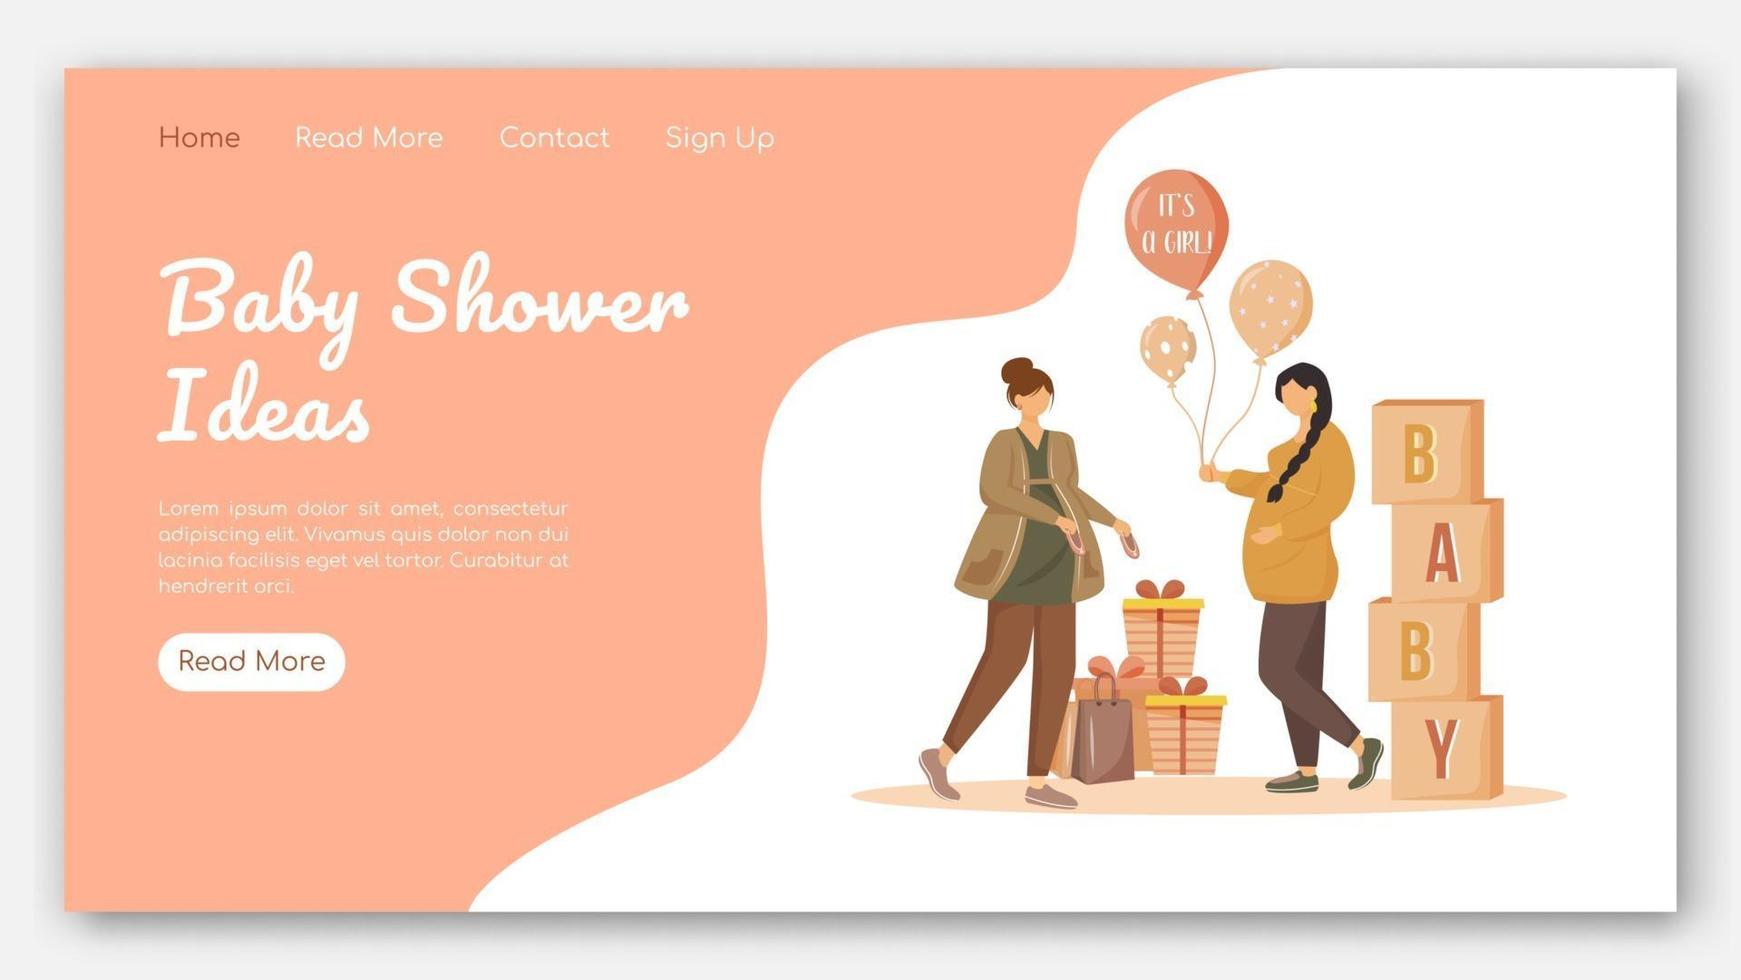 Baby shower ideas landing page vector template. Party for expecting mother website interface idea with flat illustrations. Maternity preparation homepage layout. Web banner, webpage cartoon concept